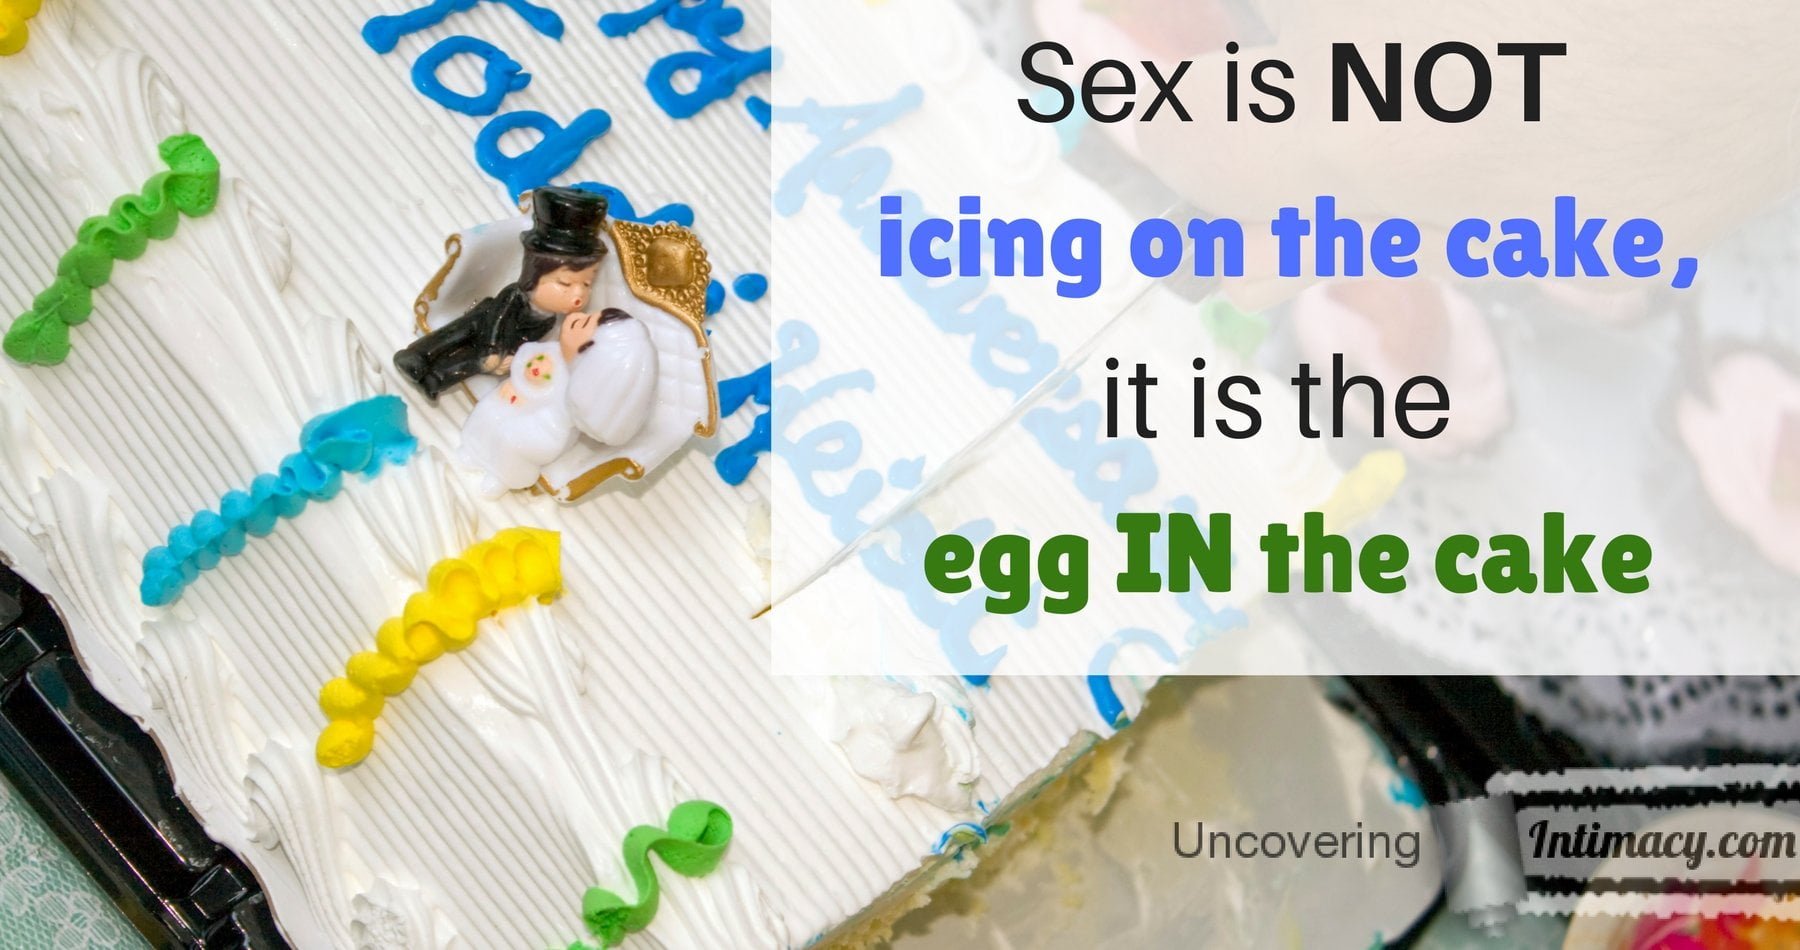 Sex is not icing on the cake, its the eggs in the cake pic